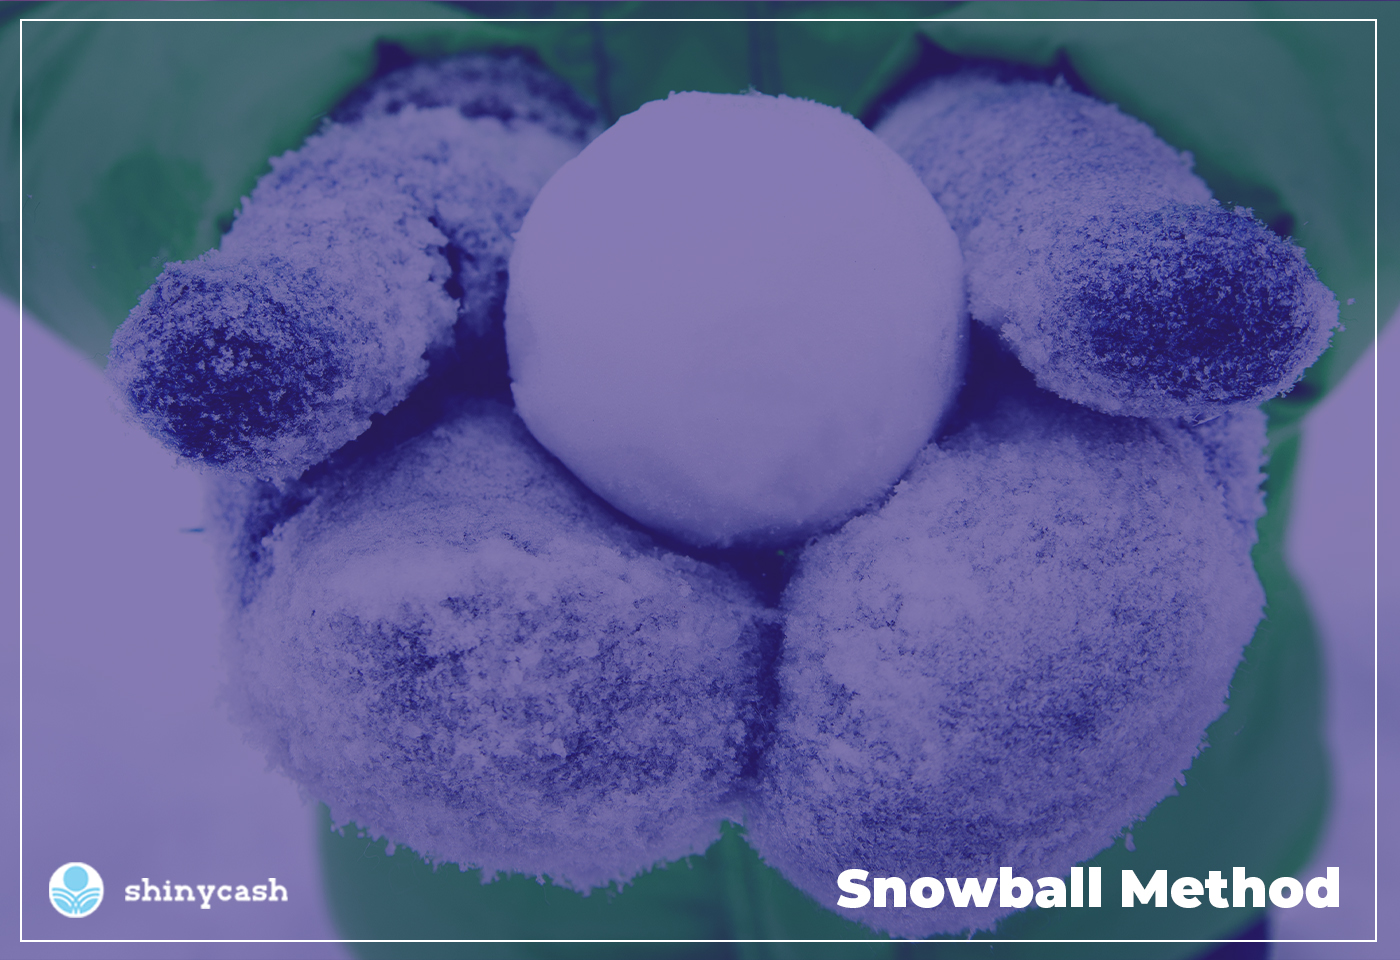 How to Use Snowball Method to pay off Debts